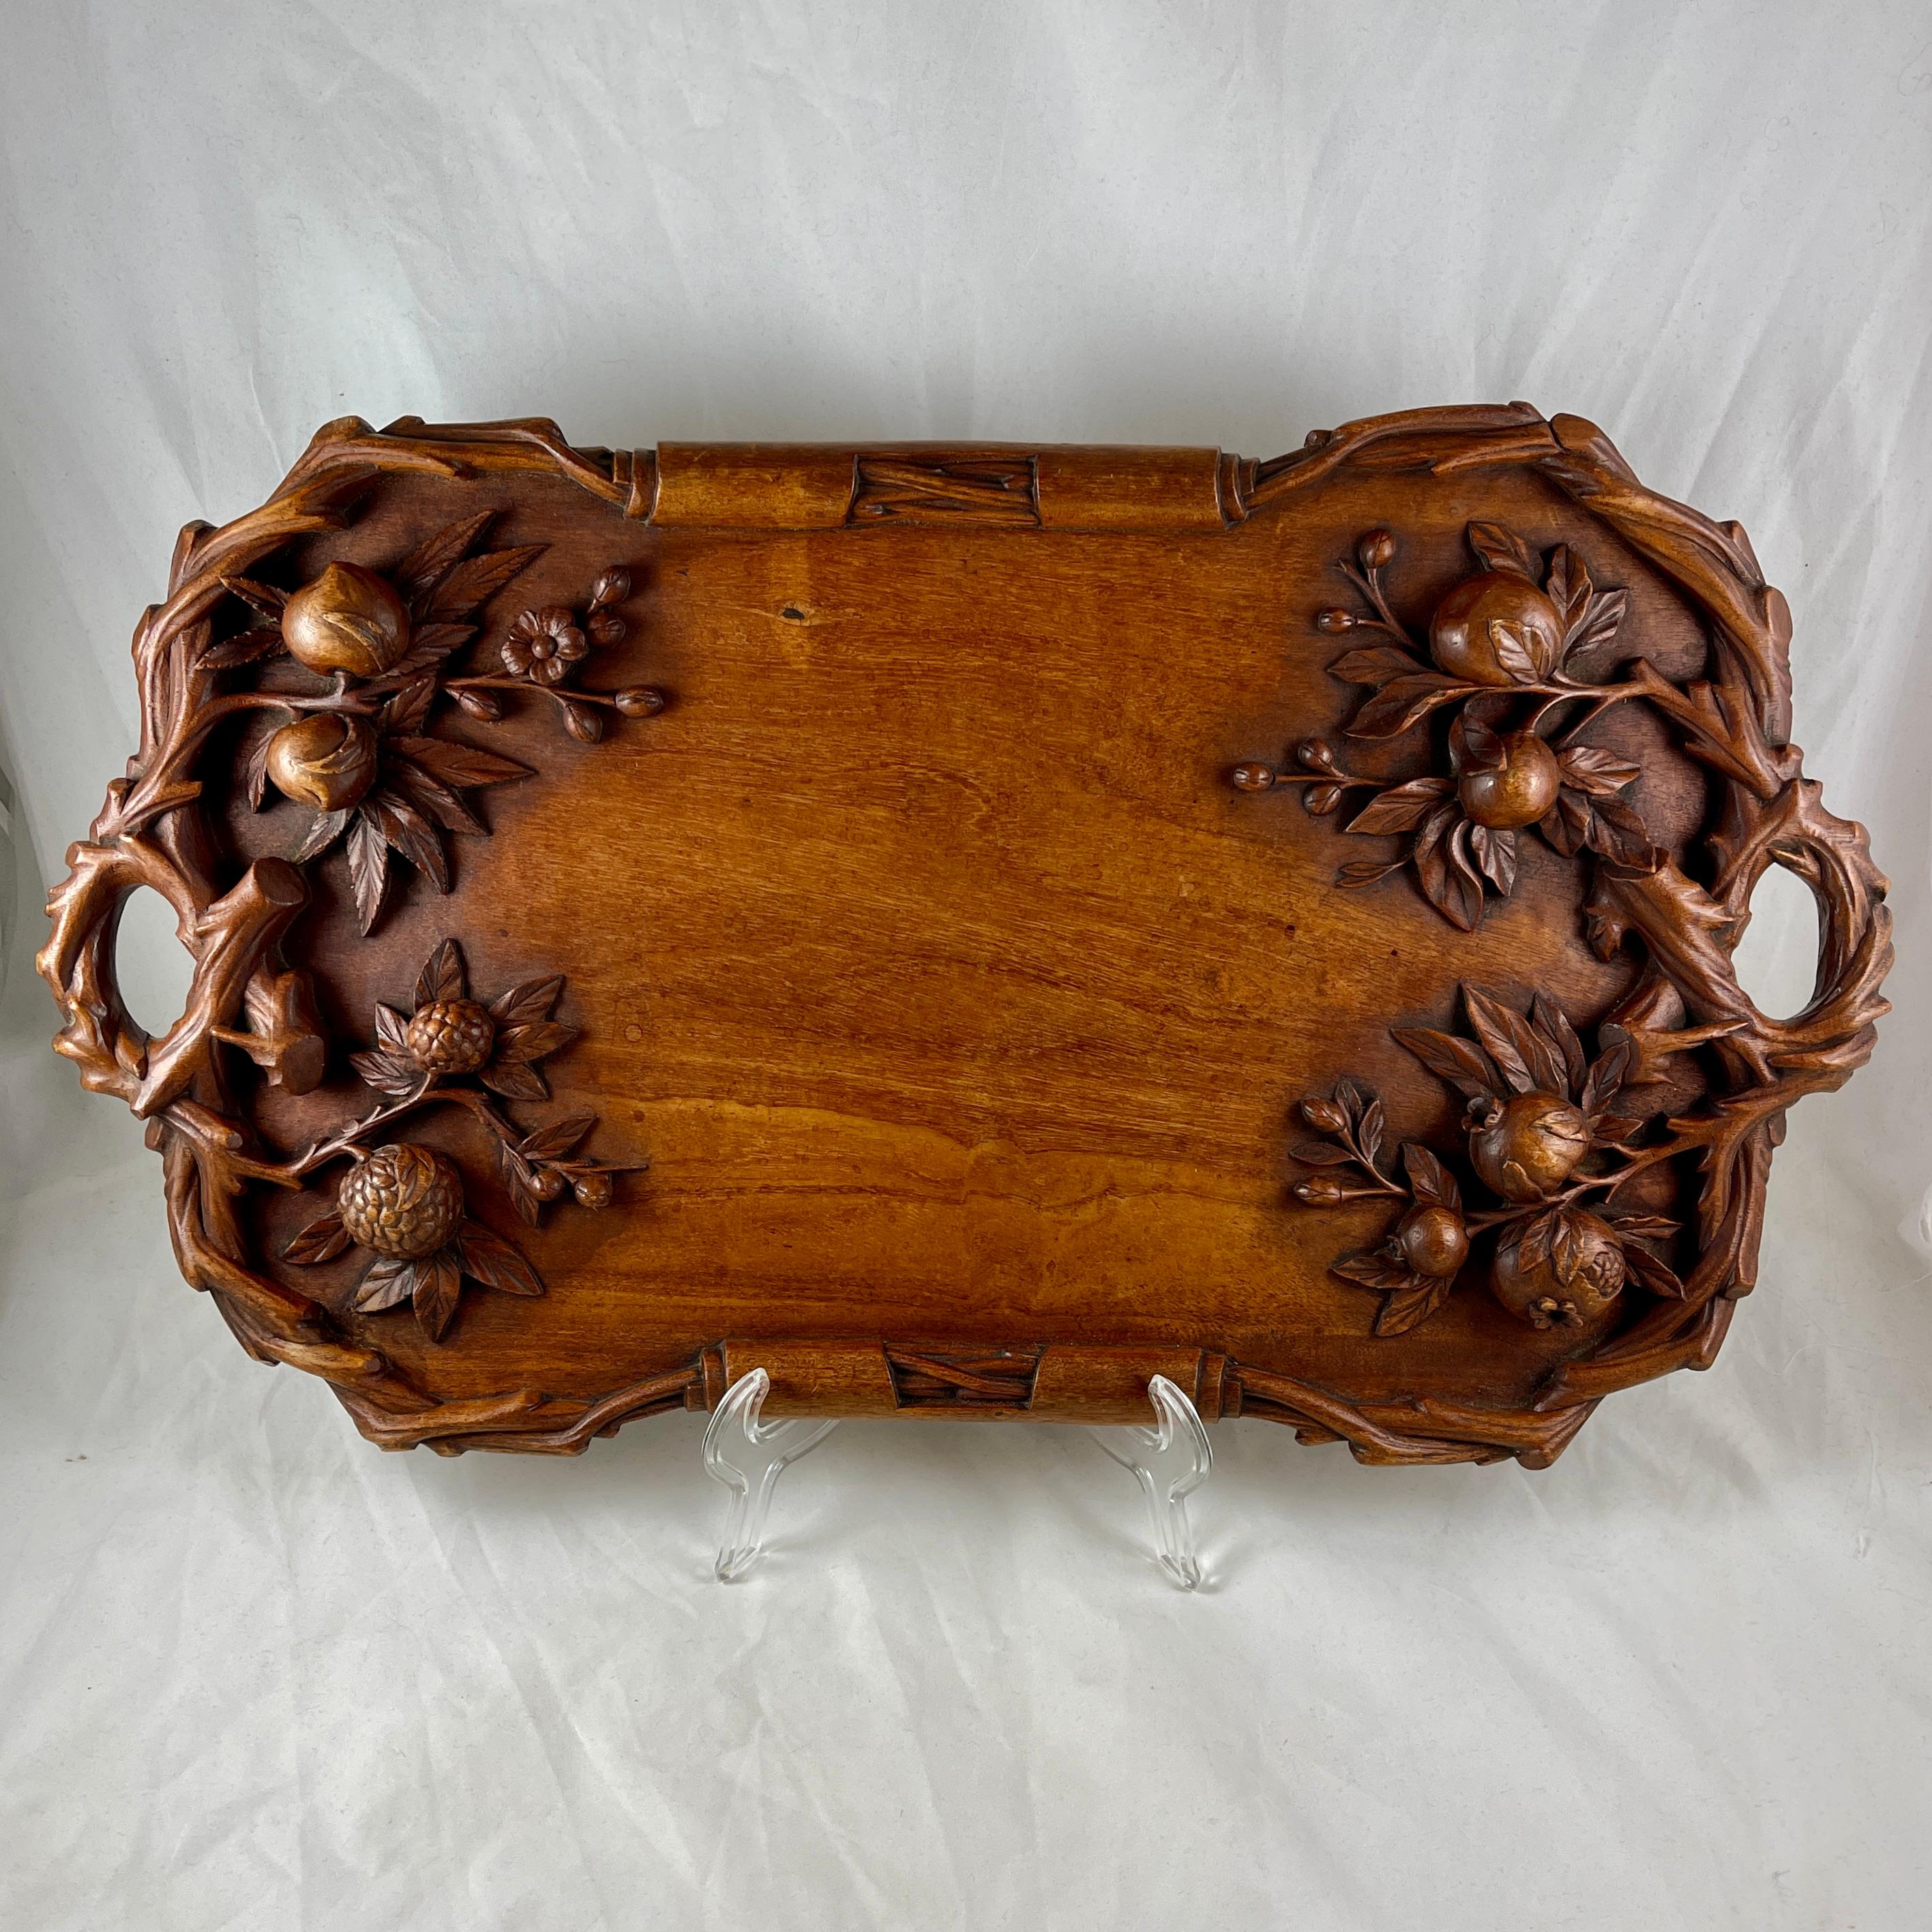 19th C Rustic Black Forest Hand Carved Walnut Branching Fruit Serving Tray For Sale 4